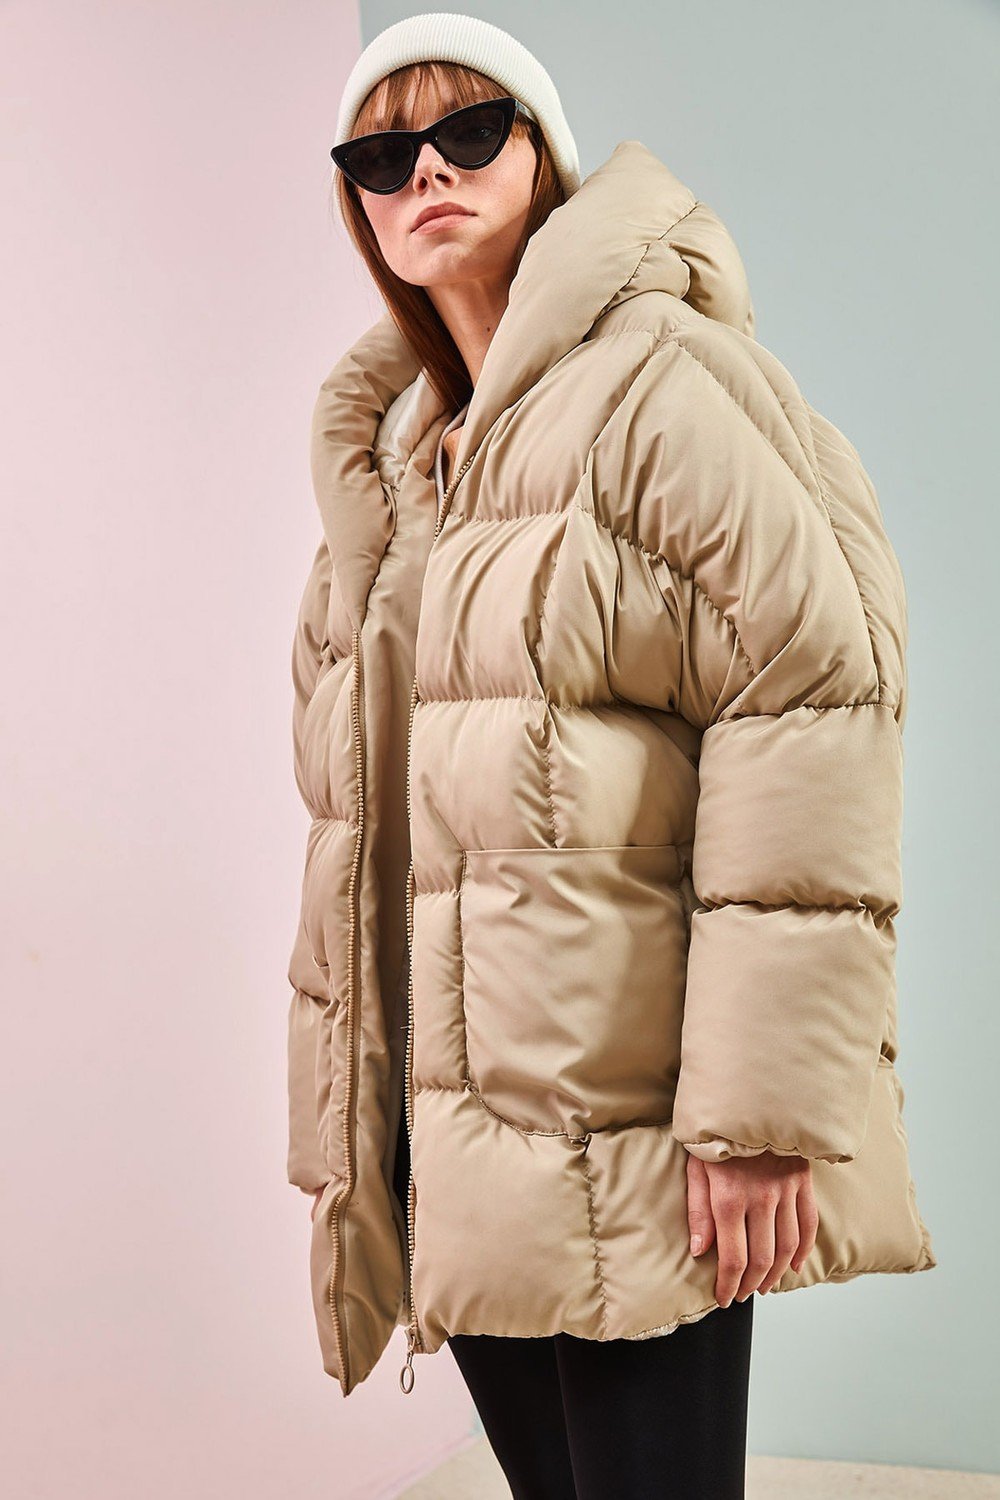 Bianco Lucci Women's Beige Oversized Puffy Coat with Large Double Pockets.